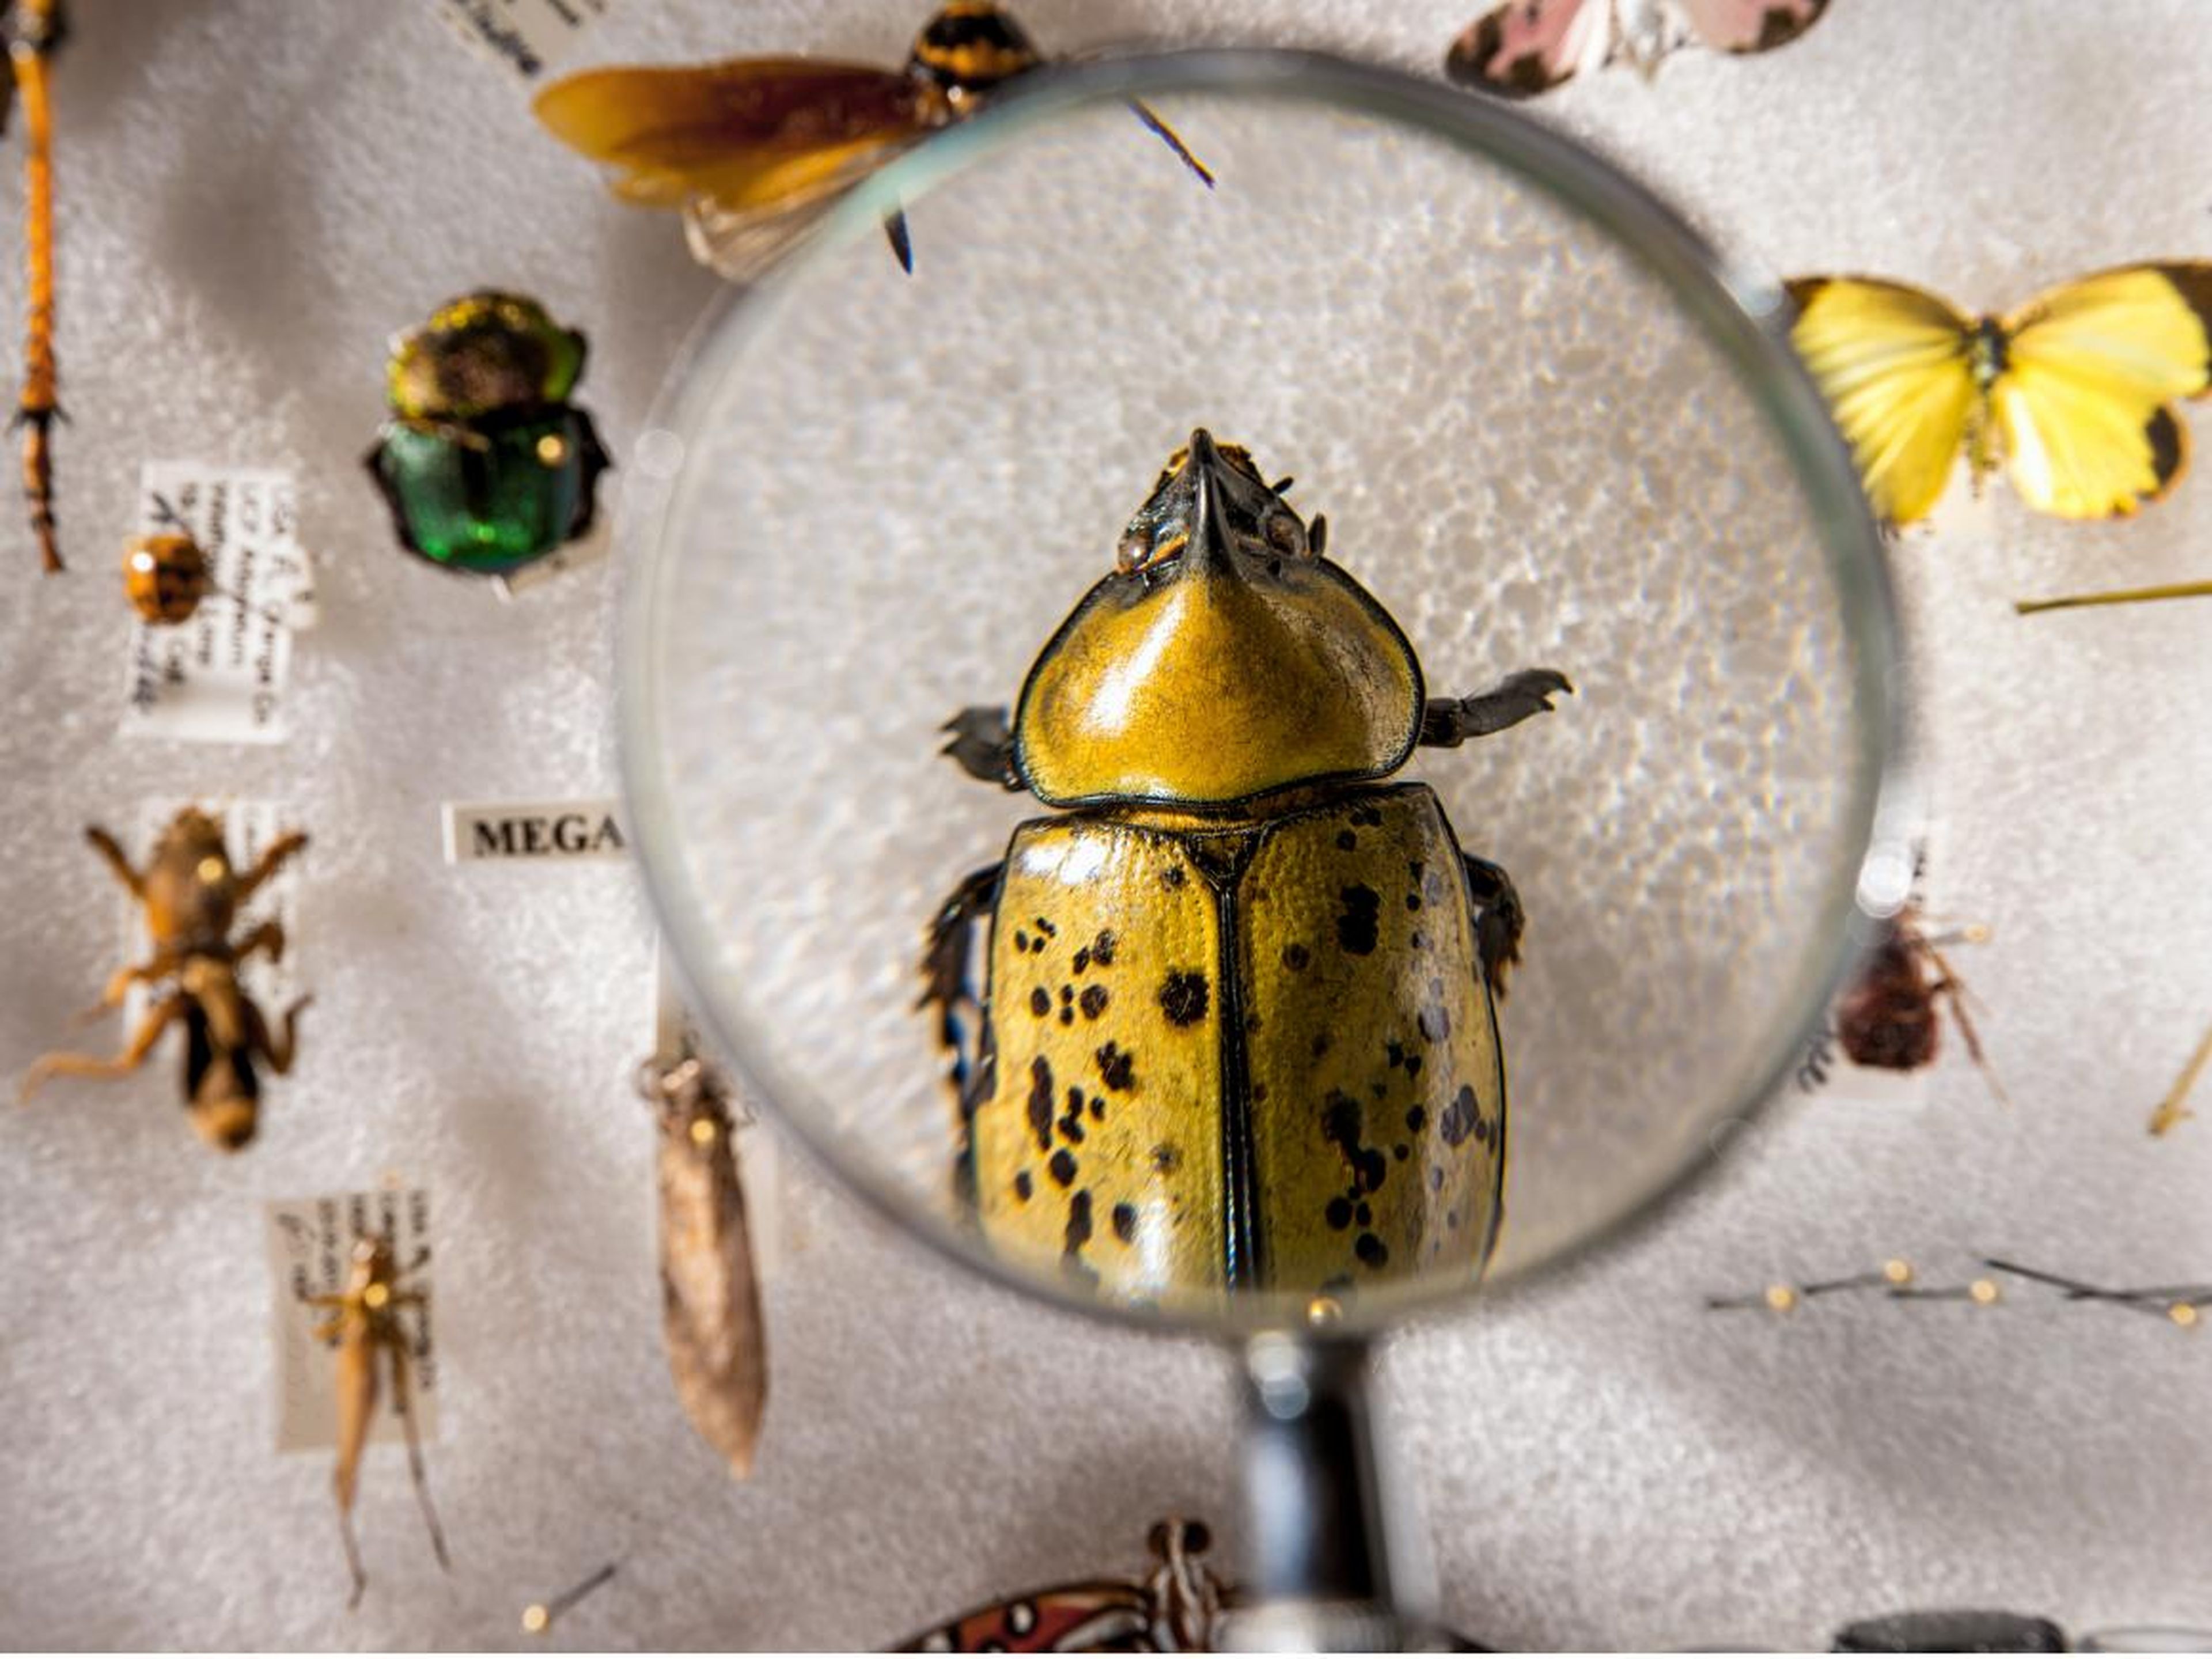 An estimated 41% of global insect species are at risk.